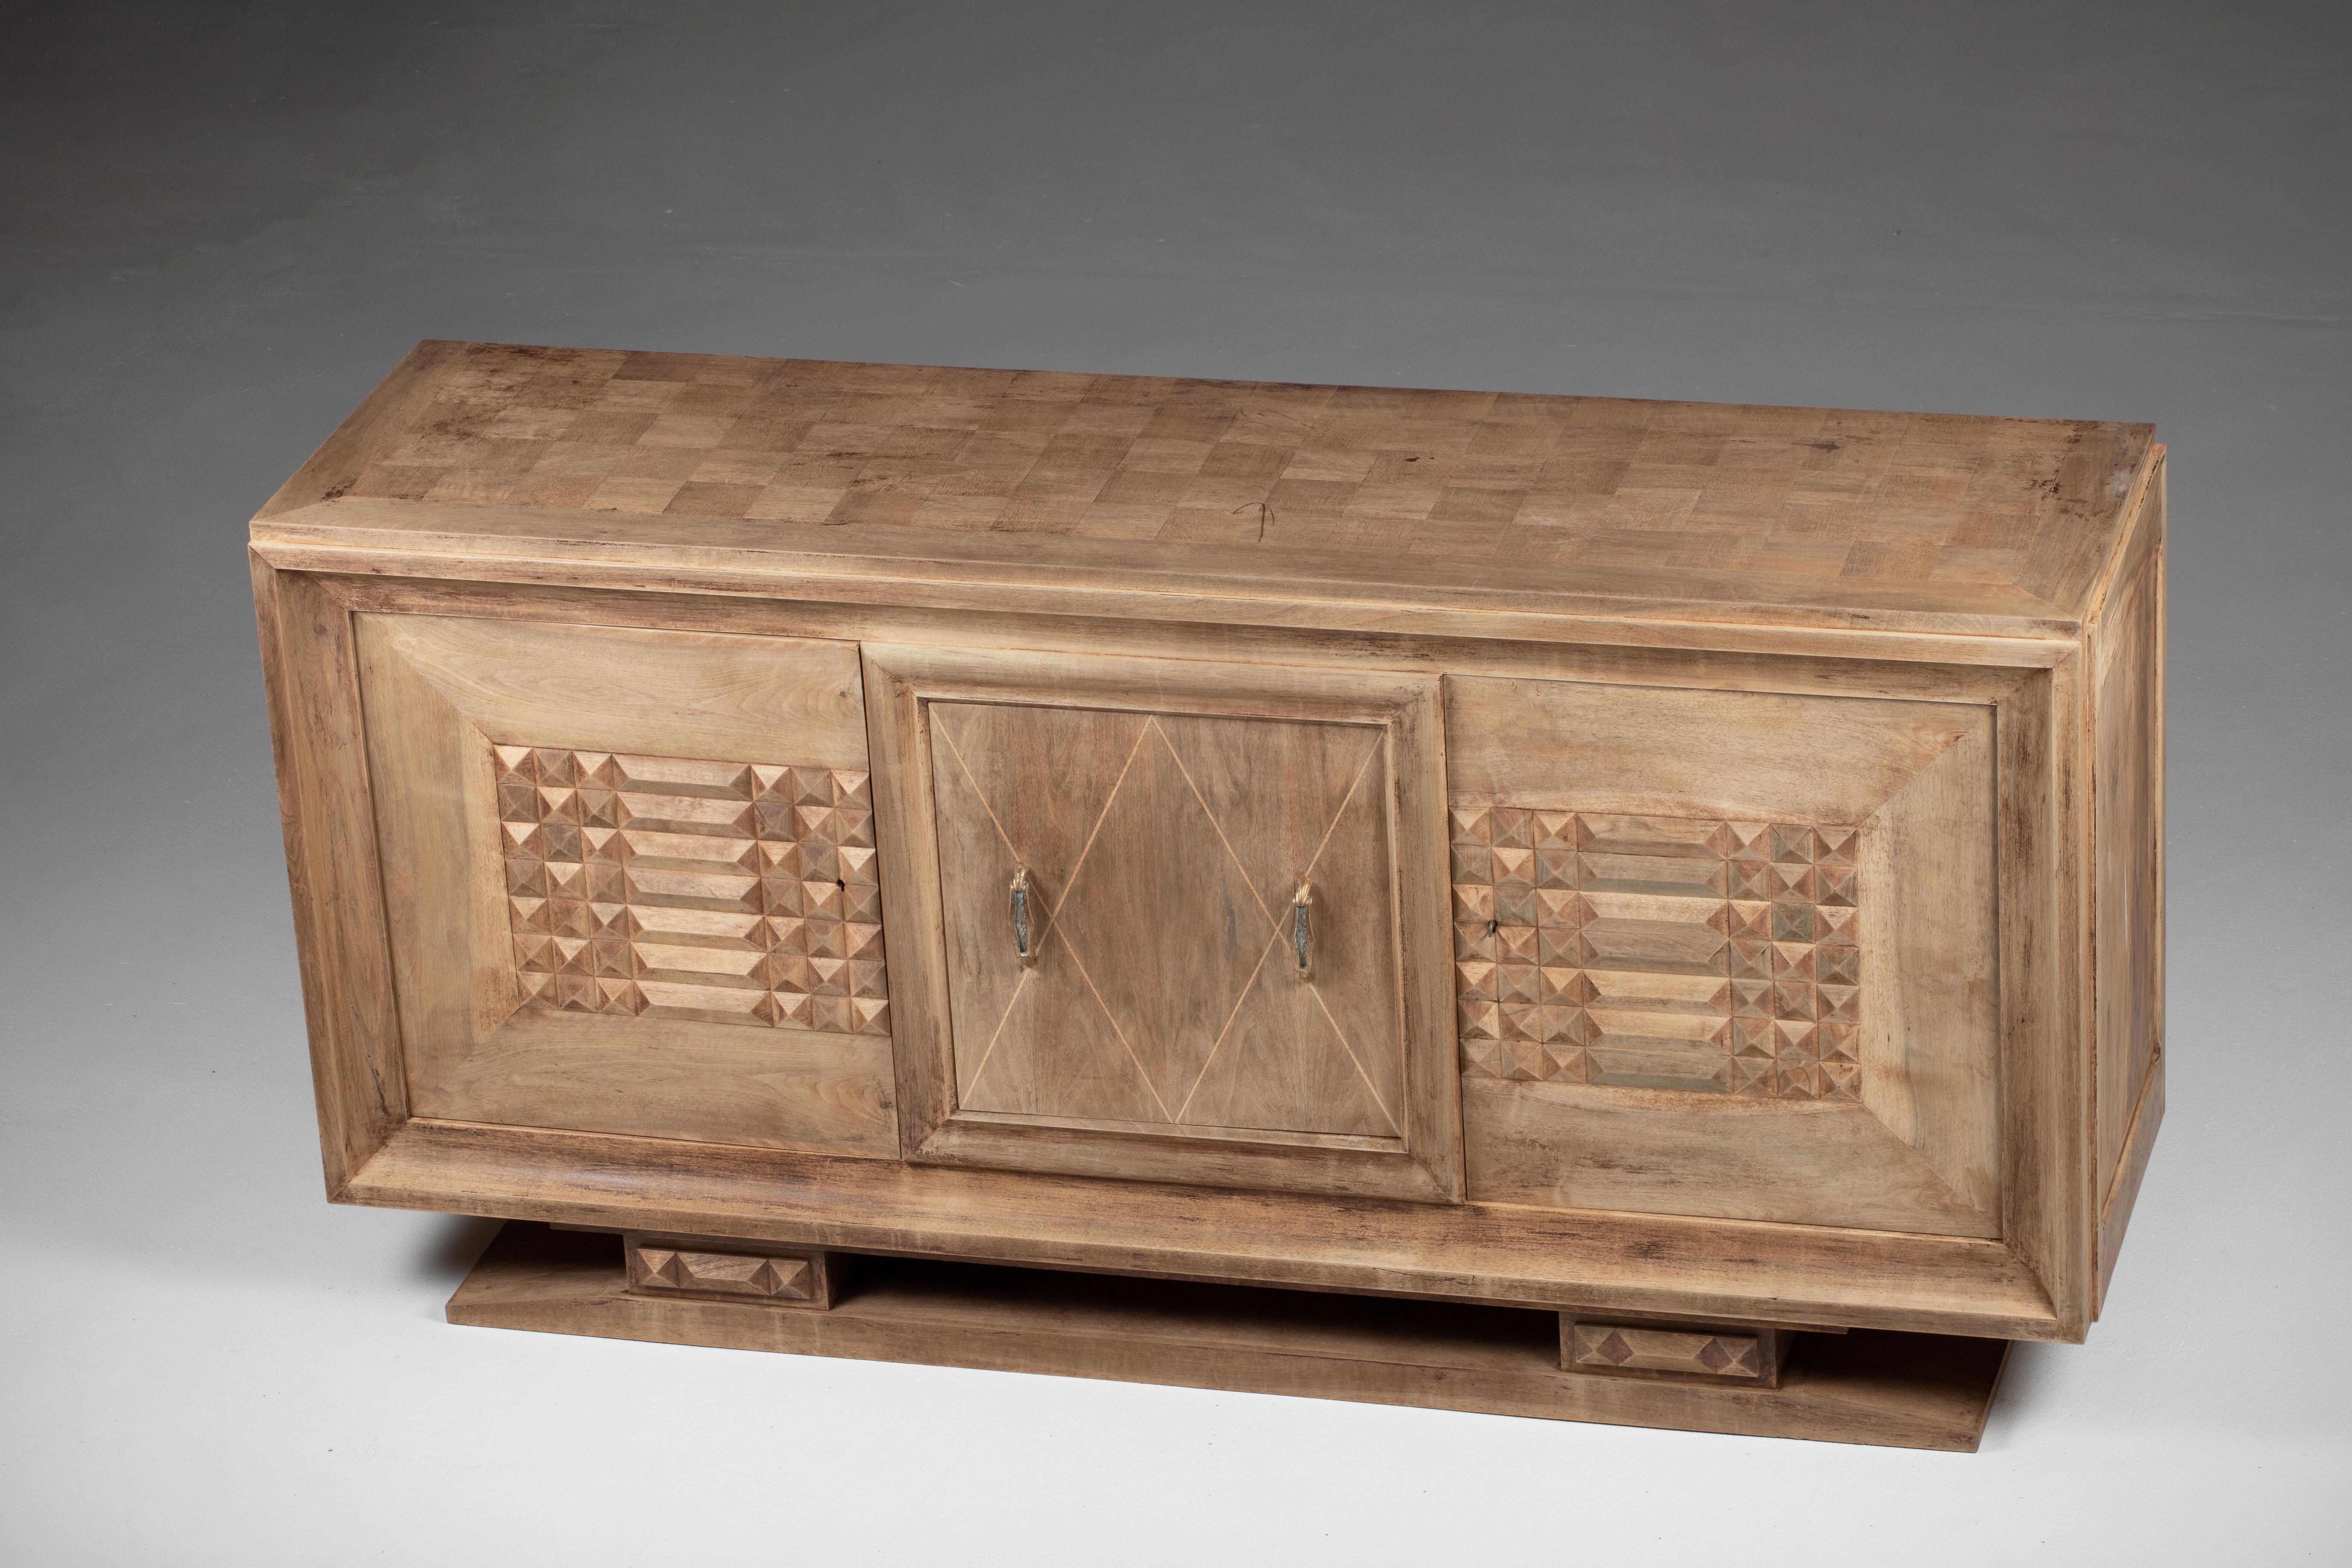 Bleached Art Deco Solid Oak Sideboard with Geometric Details, France, 1940s For Sale 9